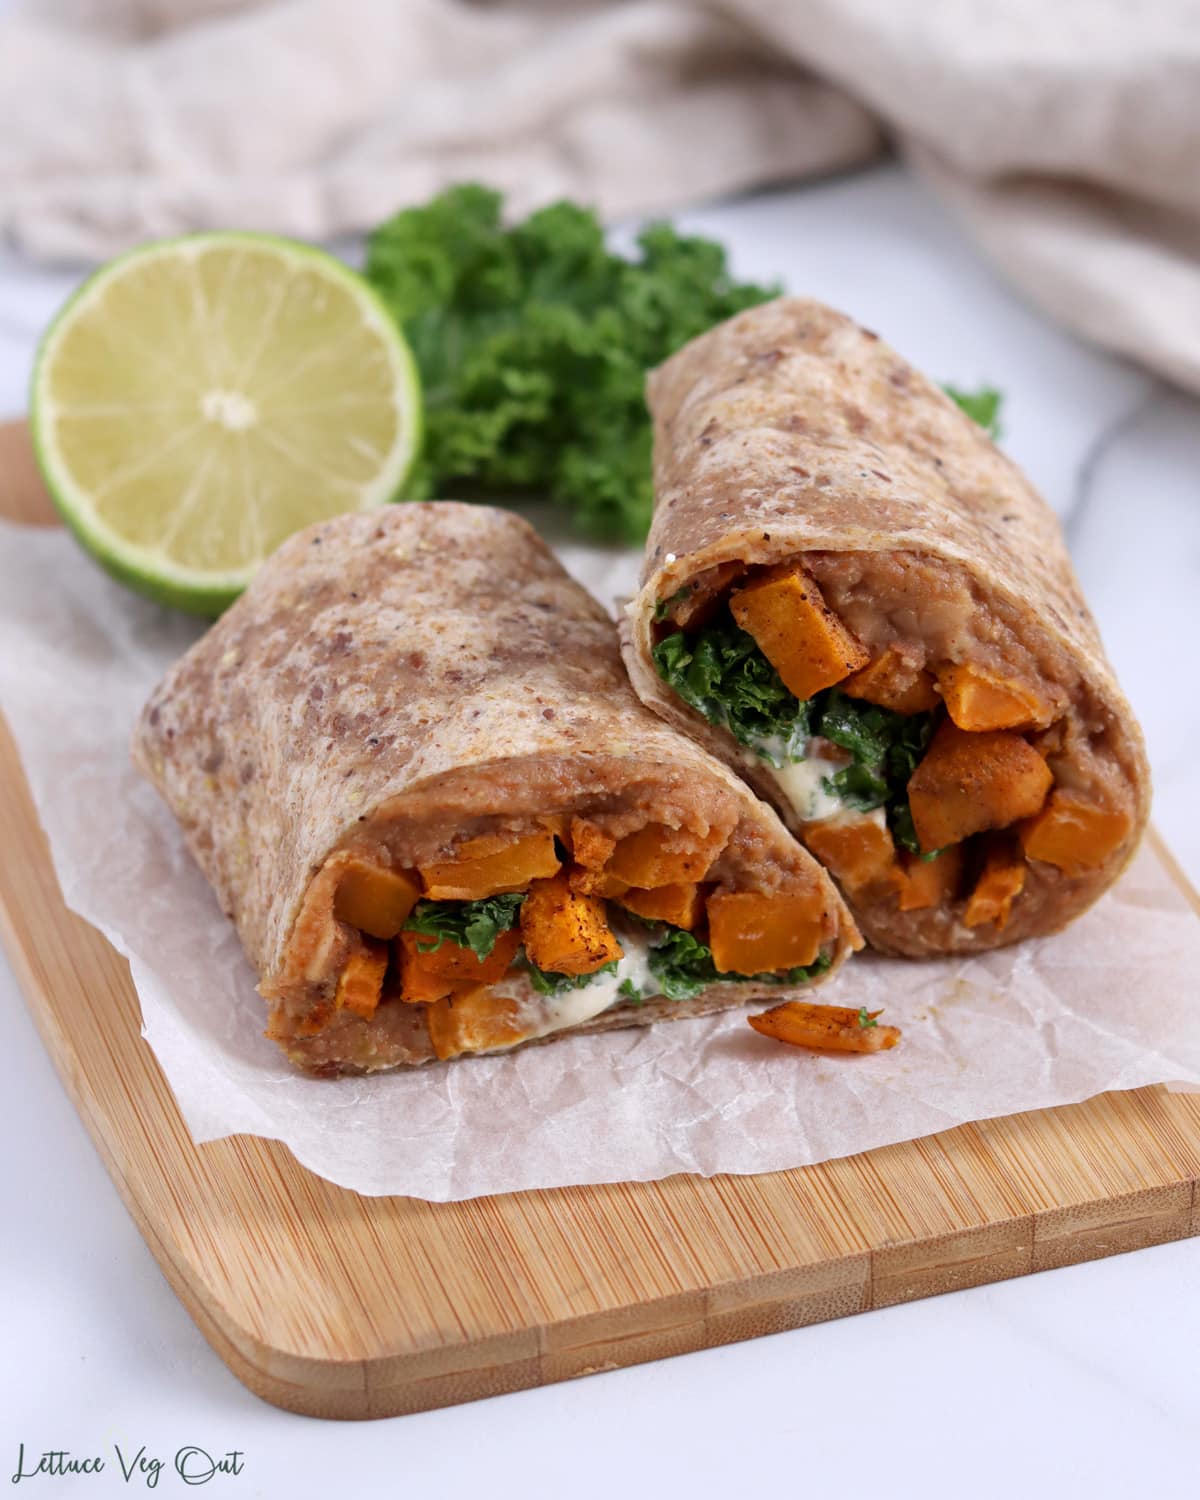 Close up of a burrito that is cut in half showing a sweet potato, refried bean and kale filling.